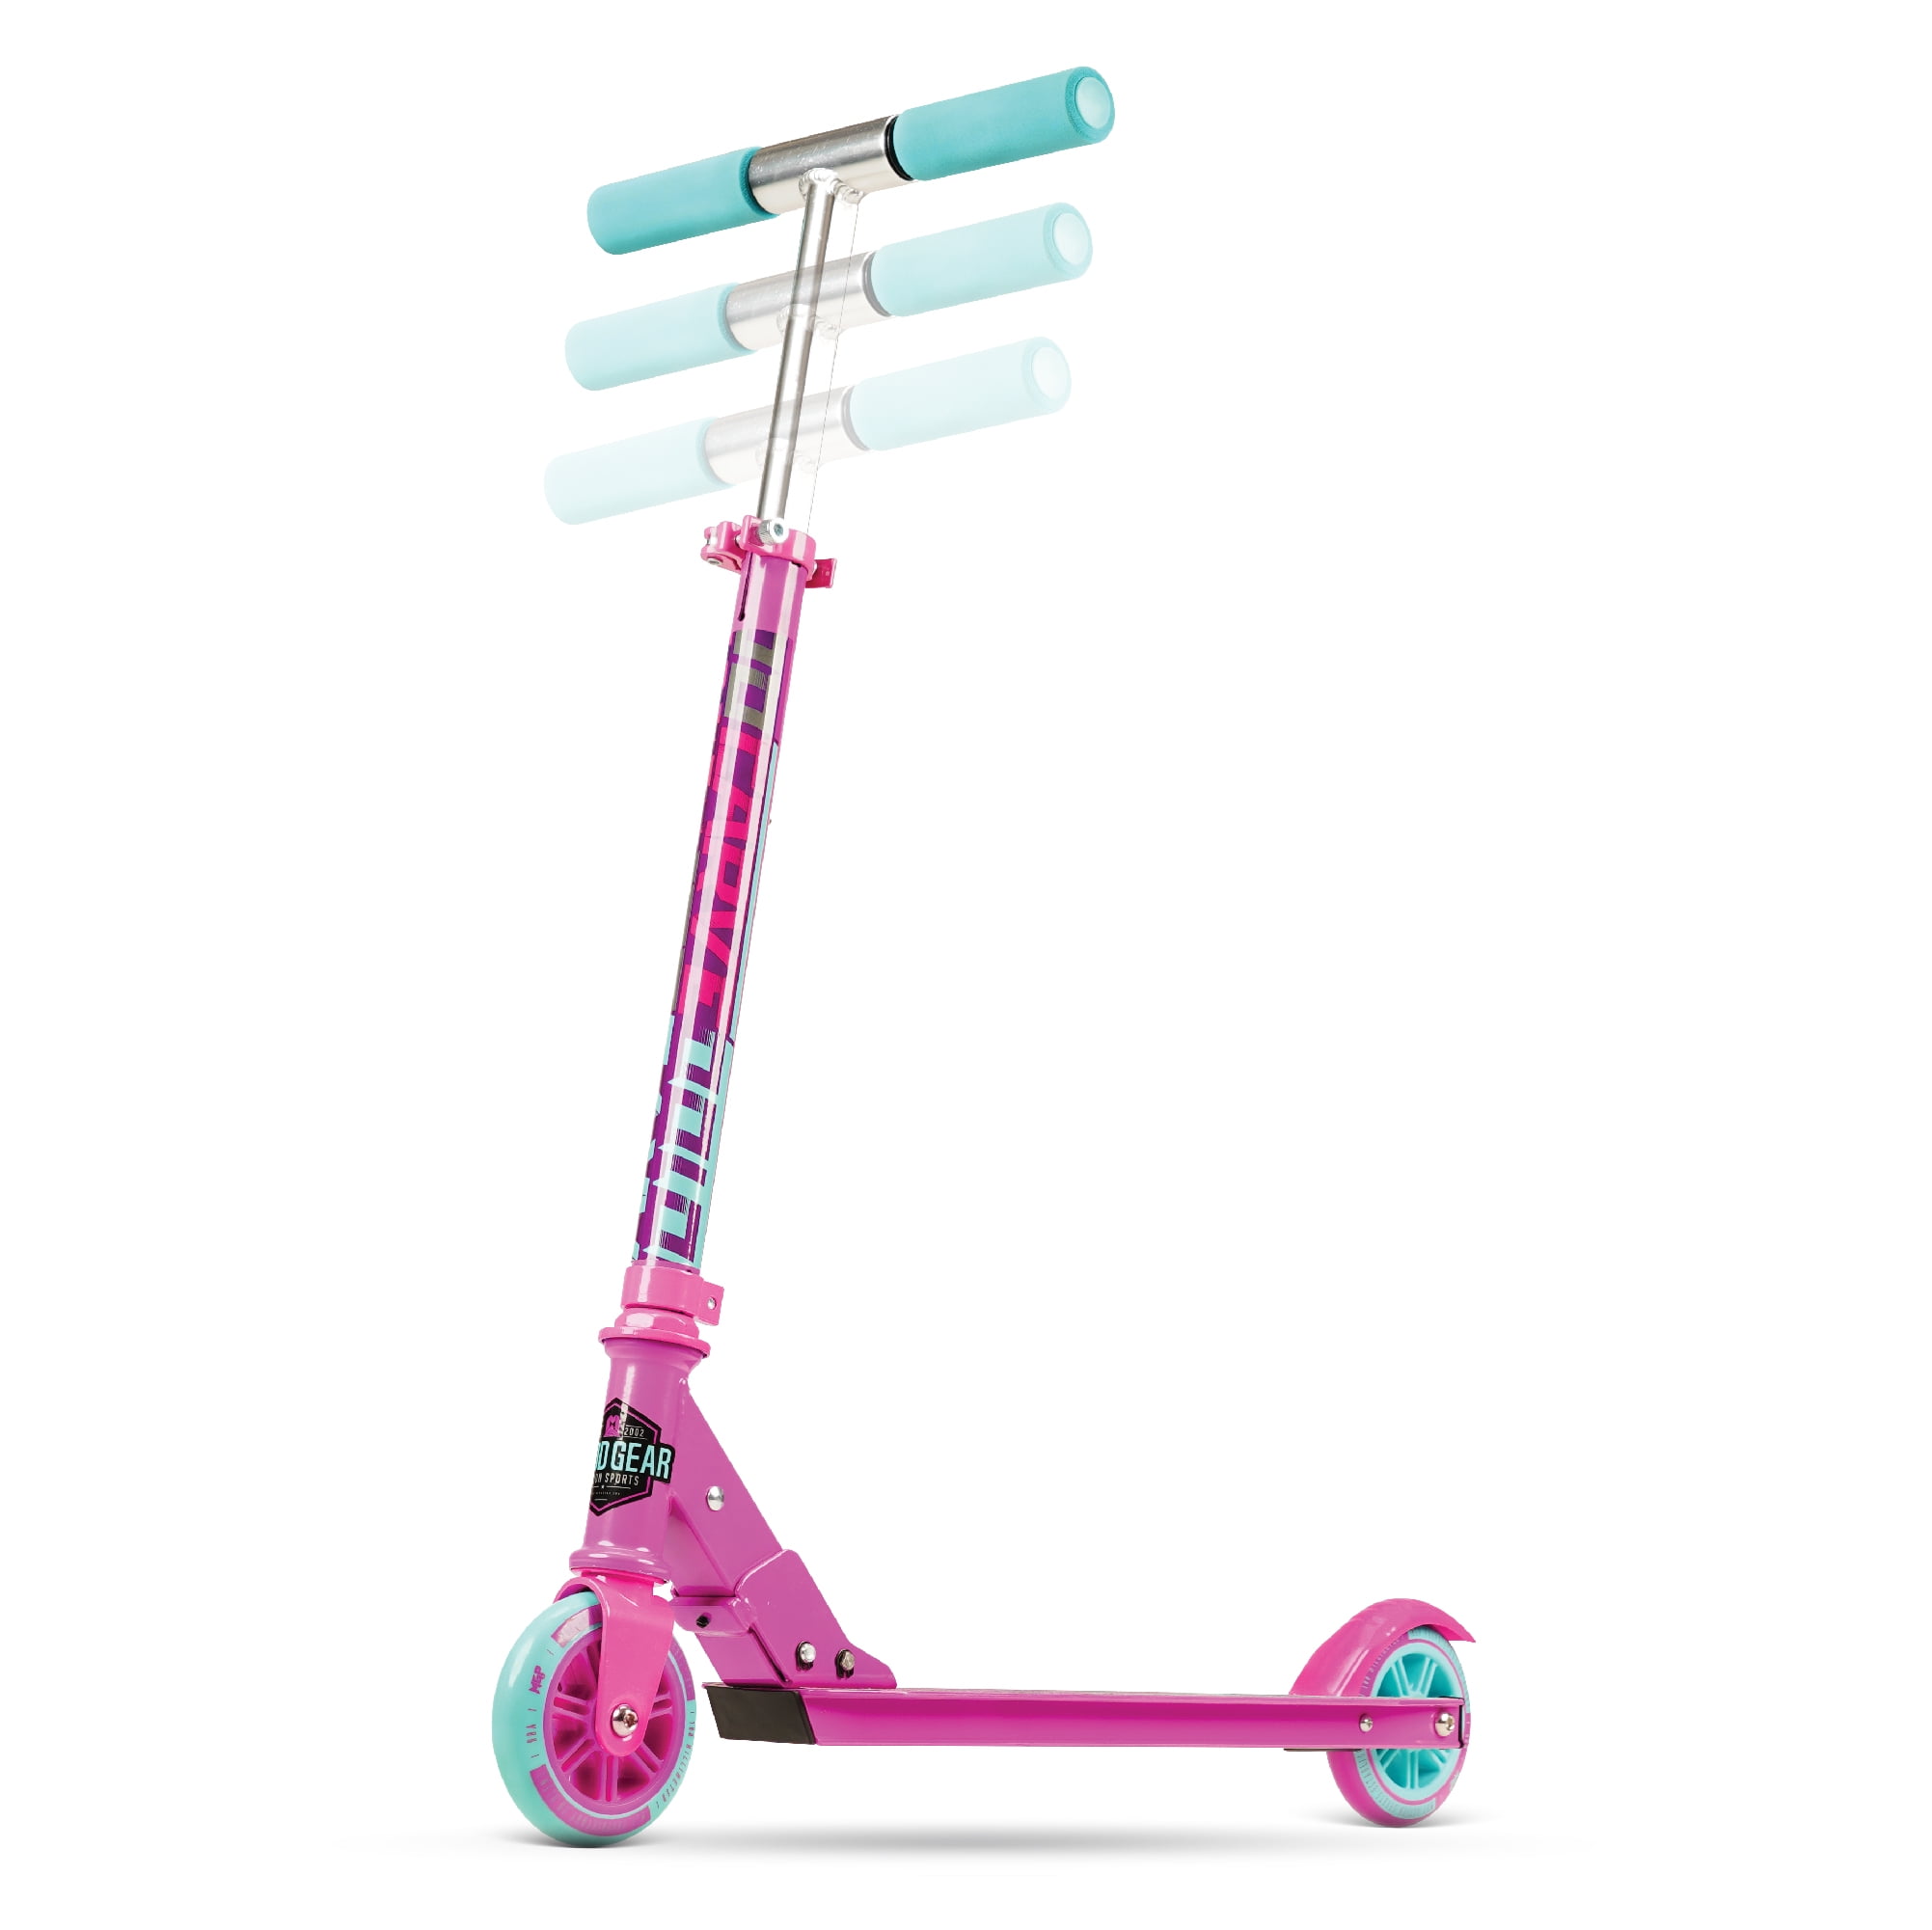 Details about   Aluminum Folding Kick Scooter Adjustable Exercise Sport Ride For Kids Adults# 